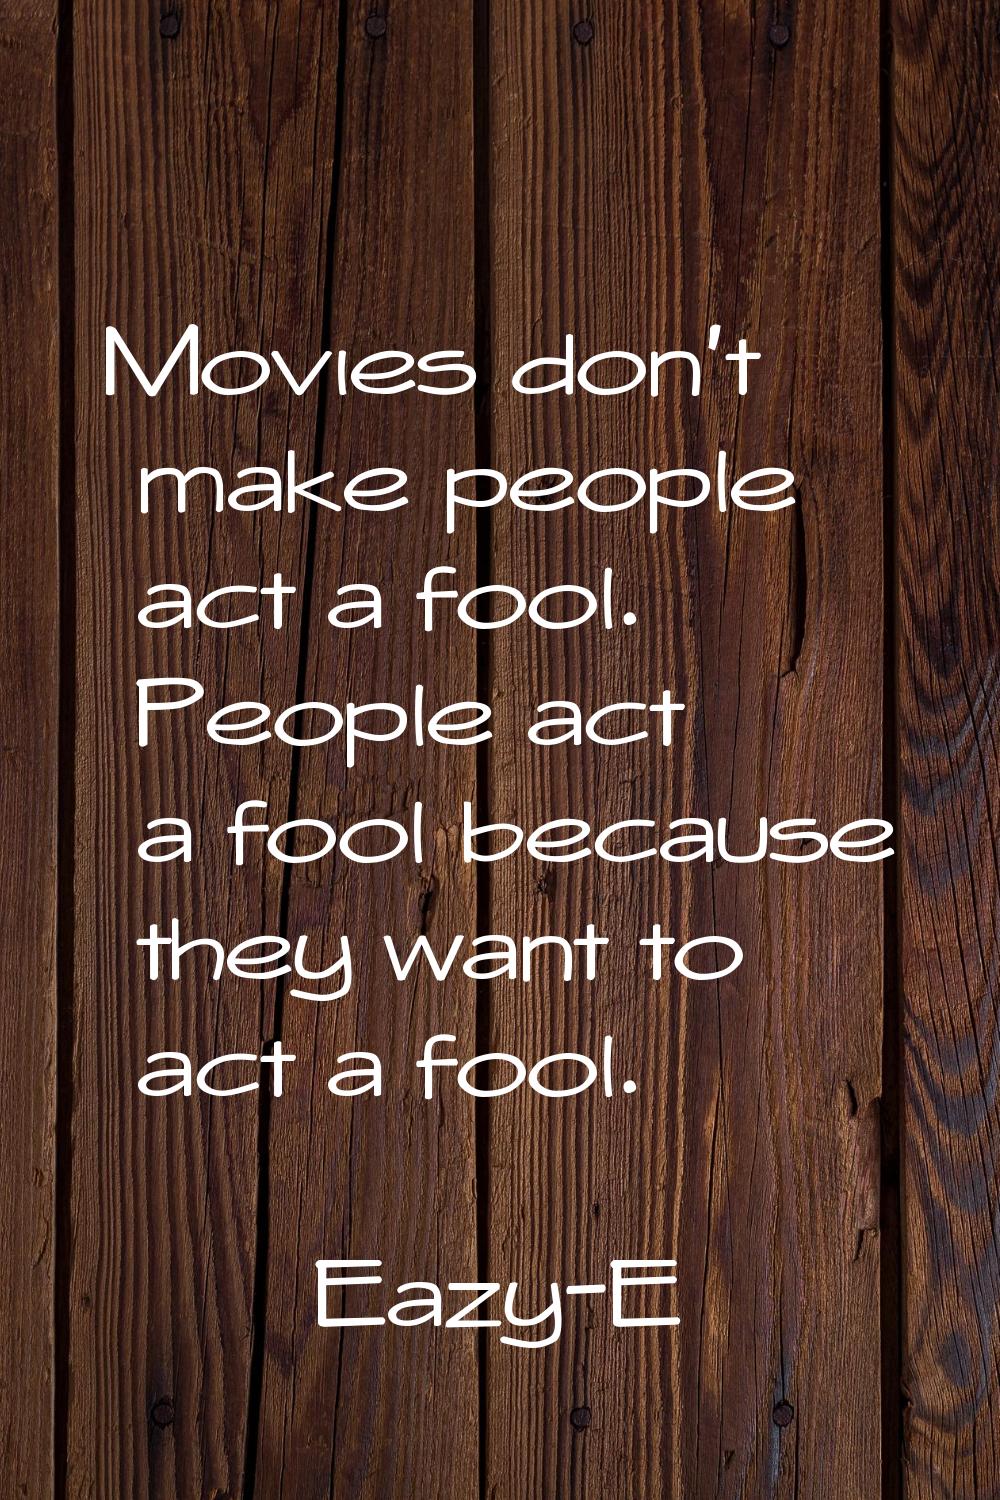 Movies don't make people act a fool. People act a fool because they want to act a fool.